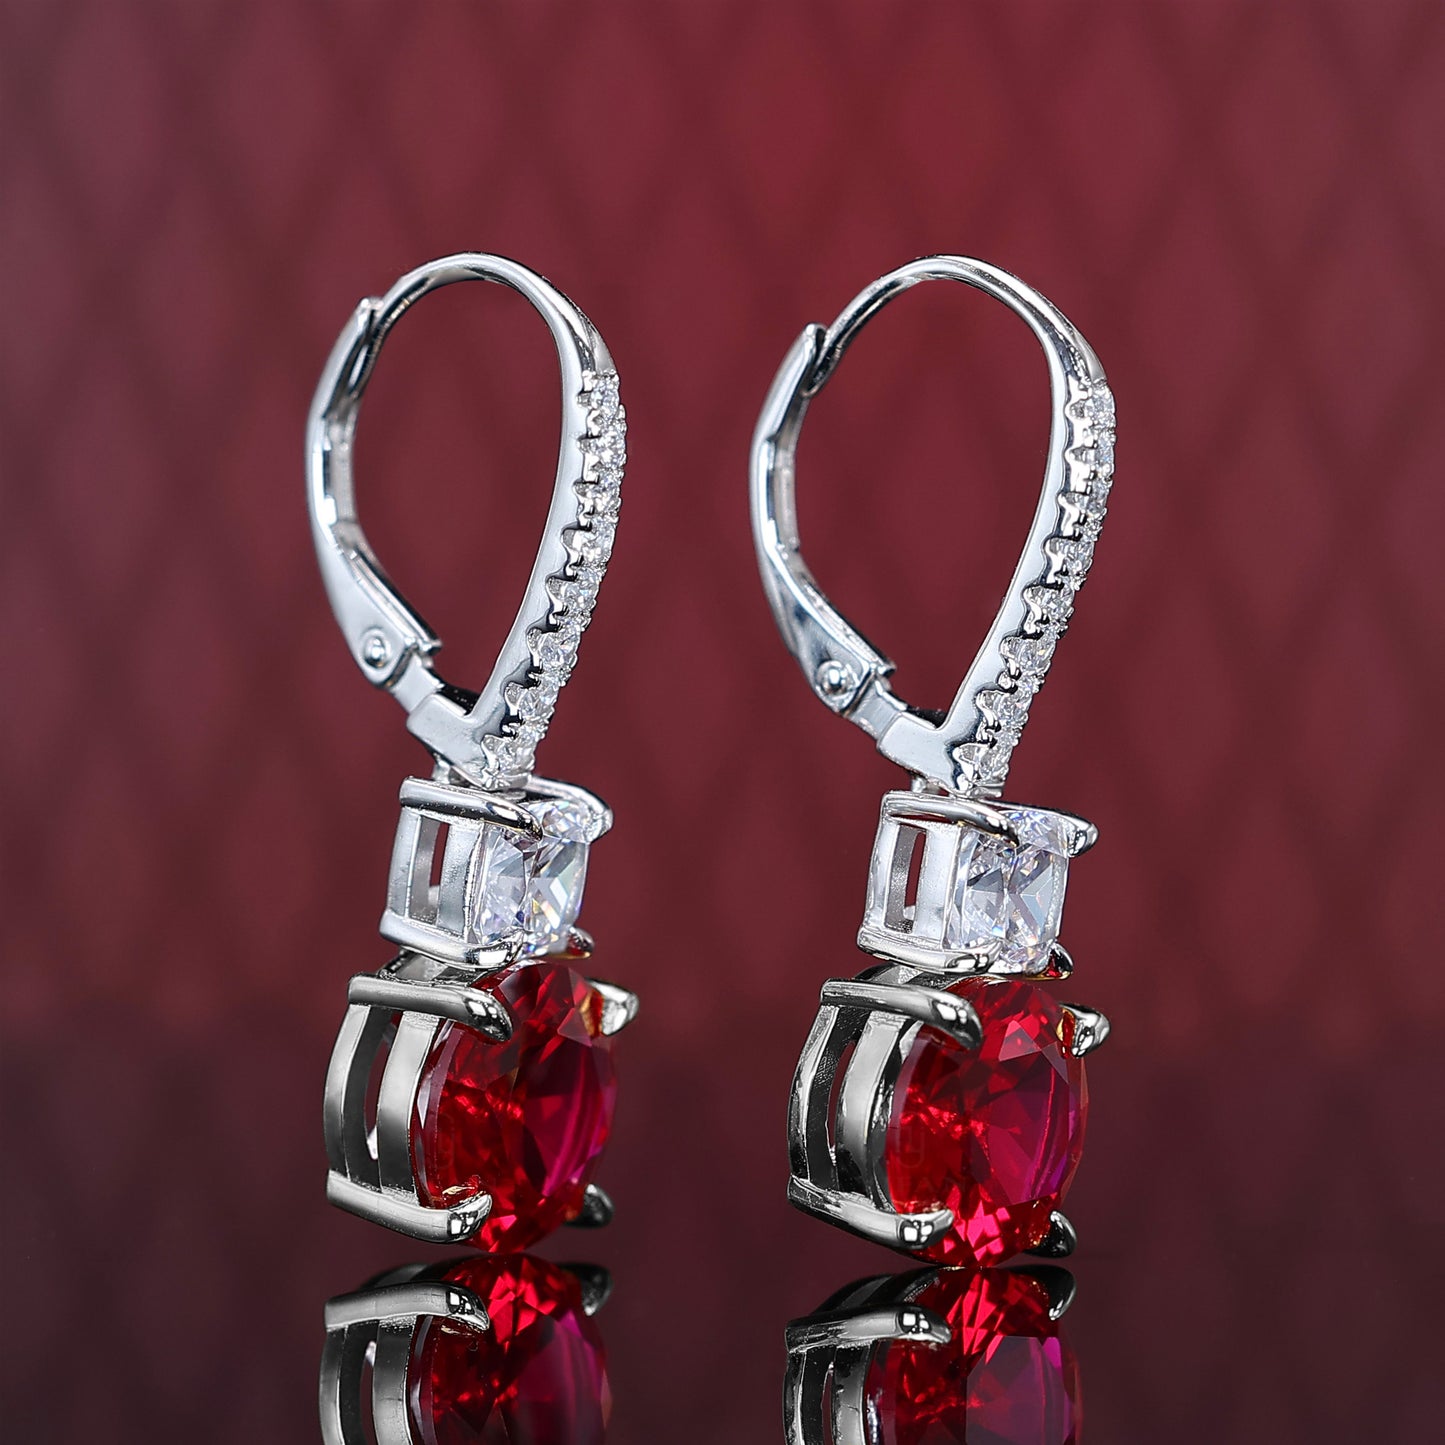 Micro-setting Ruby color round lab created stones 4 prong hook earrings, sterling silver